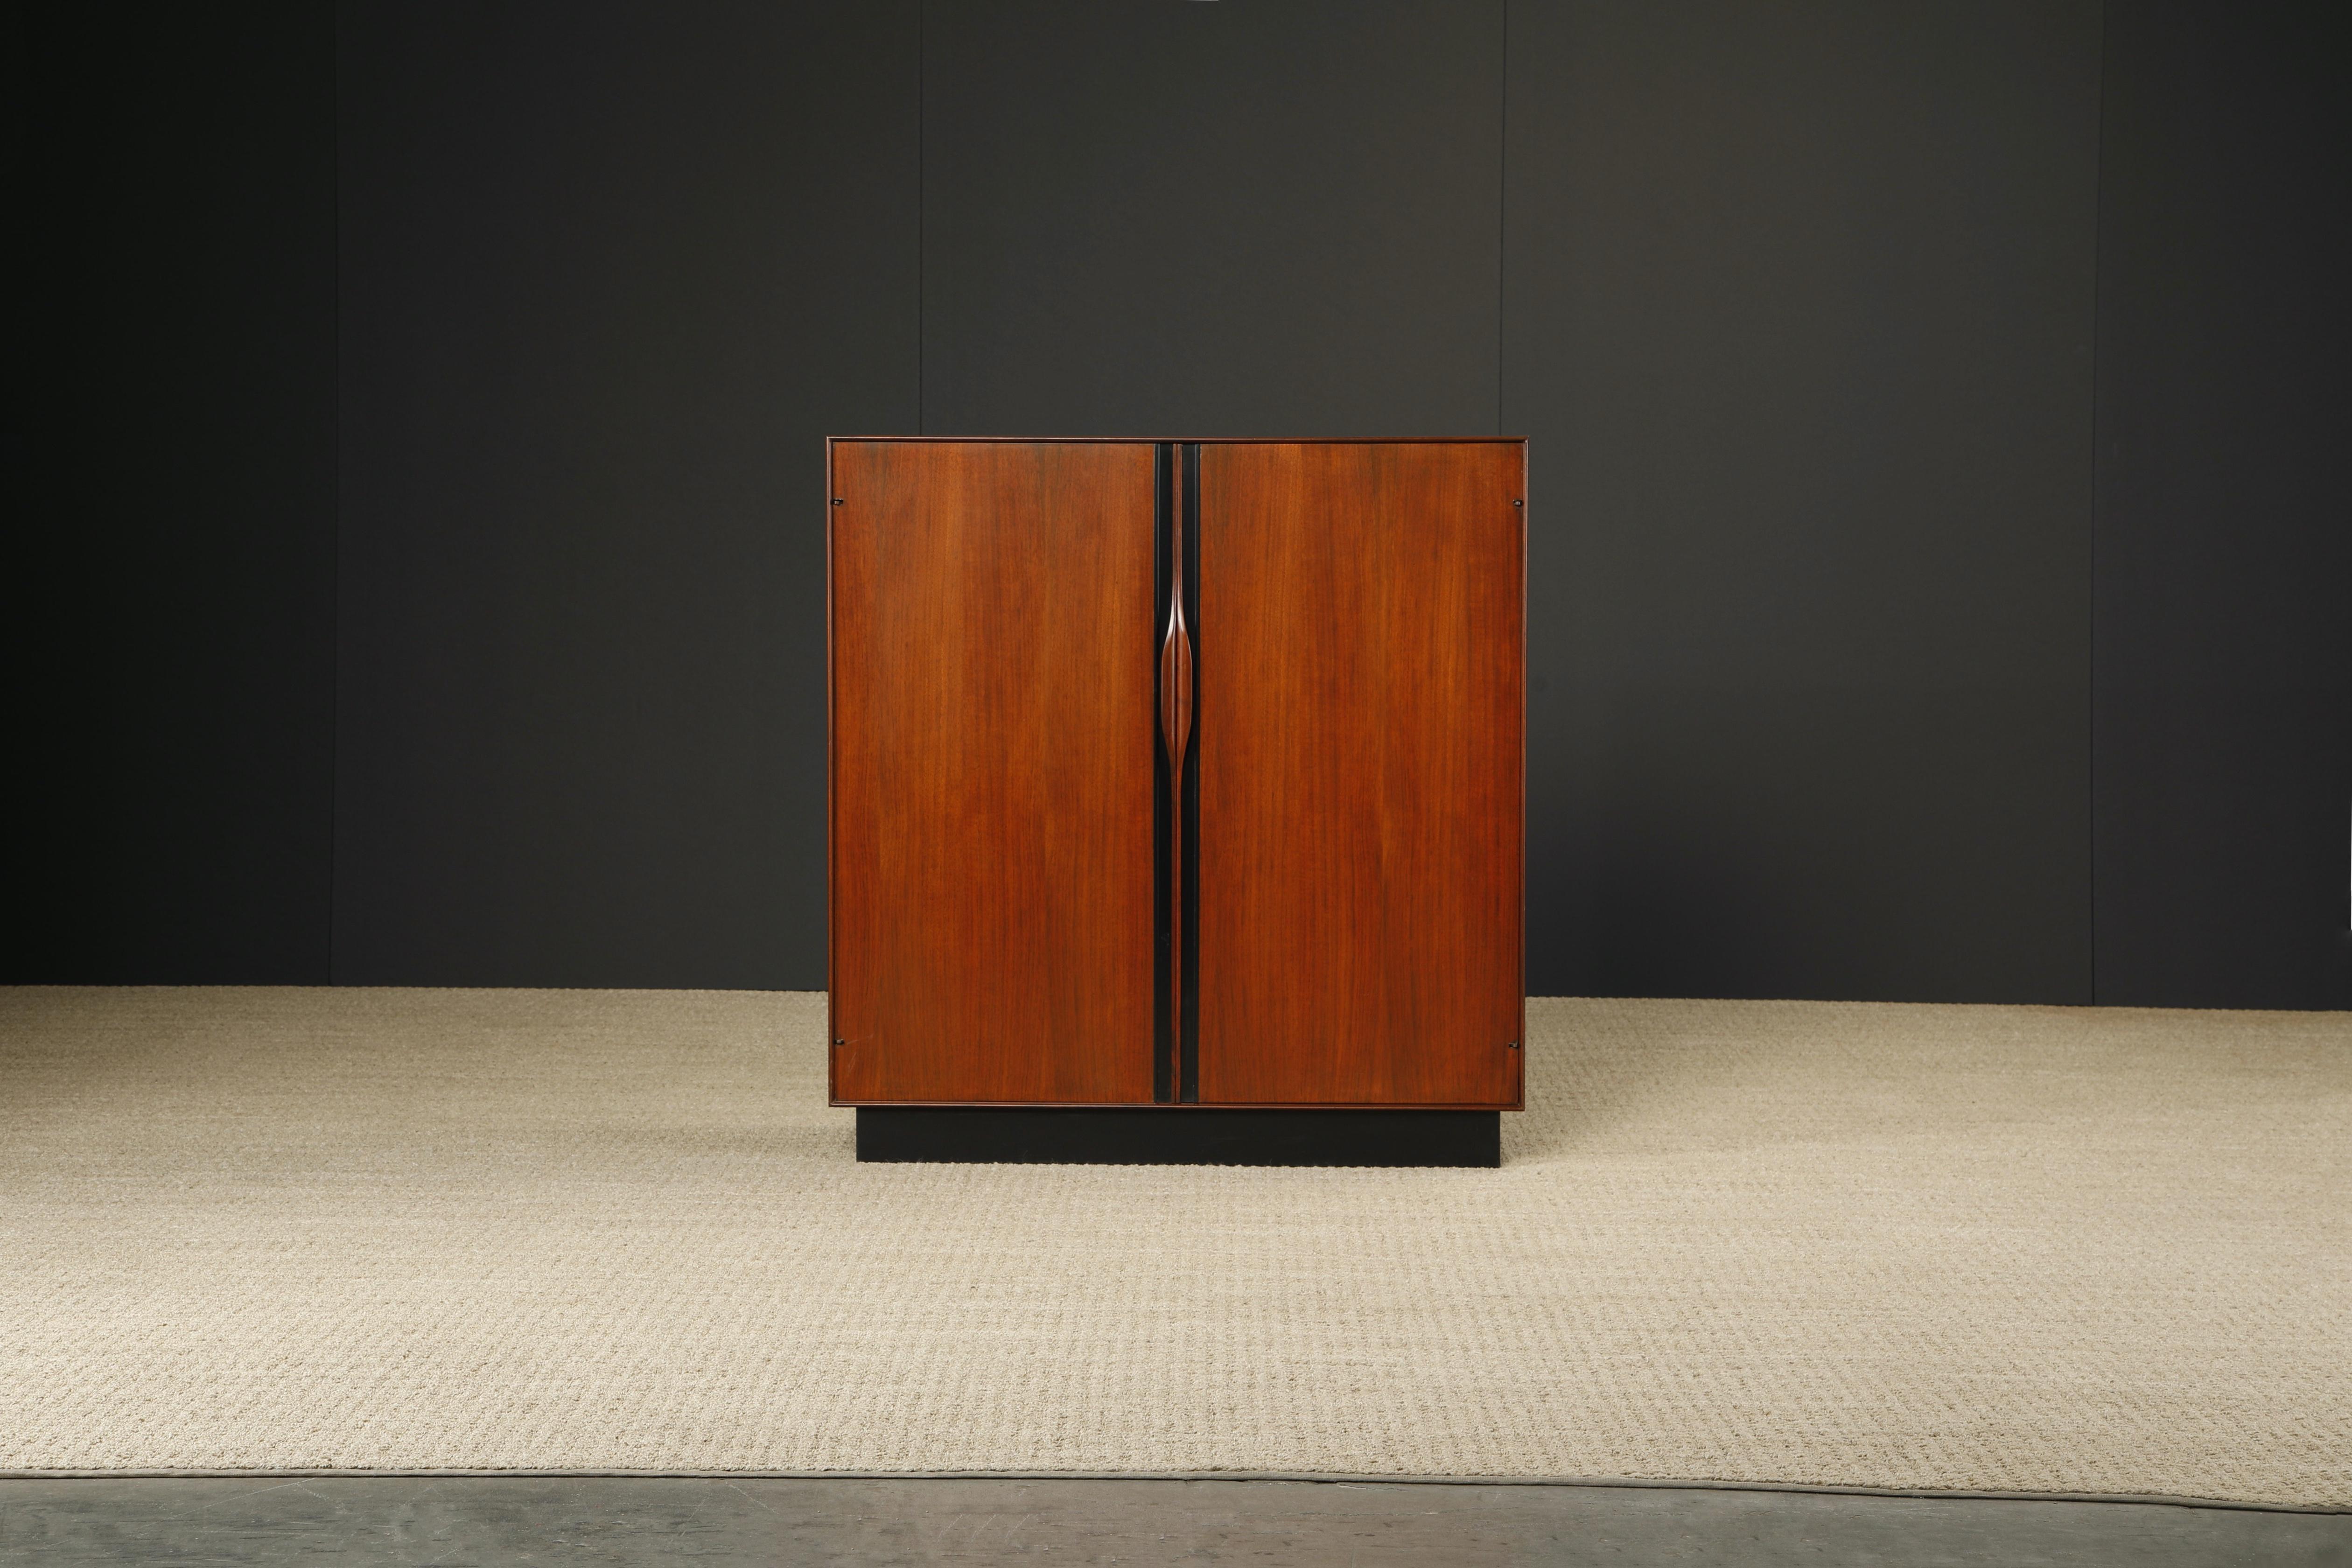 This beautiful Mid-Century Modern walnut armoire cabinet was designed by John Kapel for Glenn of California. Designed and produced in the 1960s, this example is signed with a Glenn of California medallion in one drawer. 

This beautiful bedroom